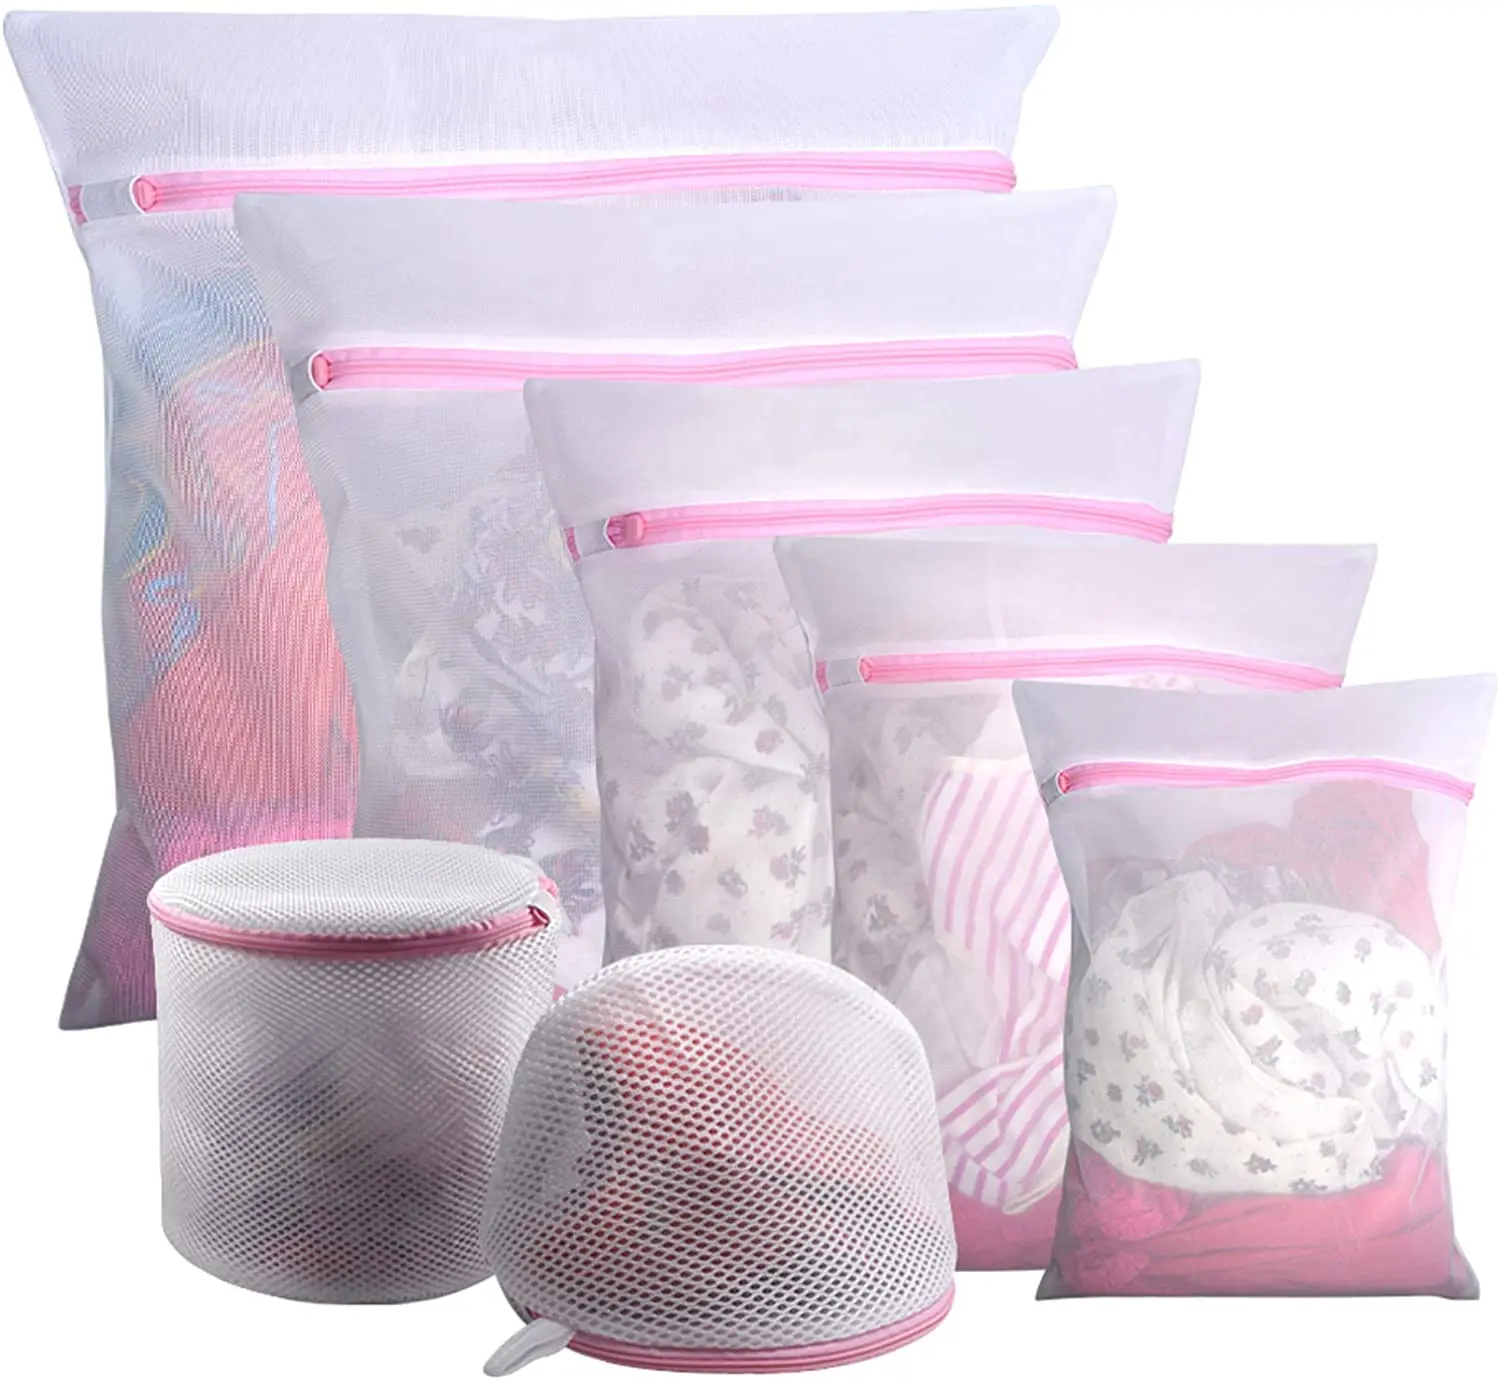 

Mesh Laundry Bags for Delicates with Premium Zipper, Travel Storage Organize Bag, Clothing Washing Bags for Laundry, Blouse, Bra